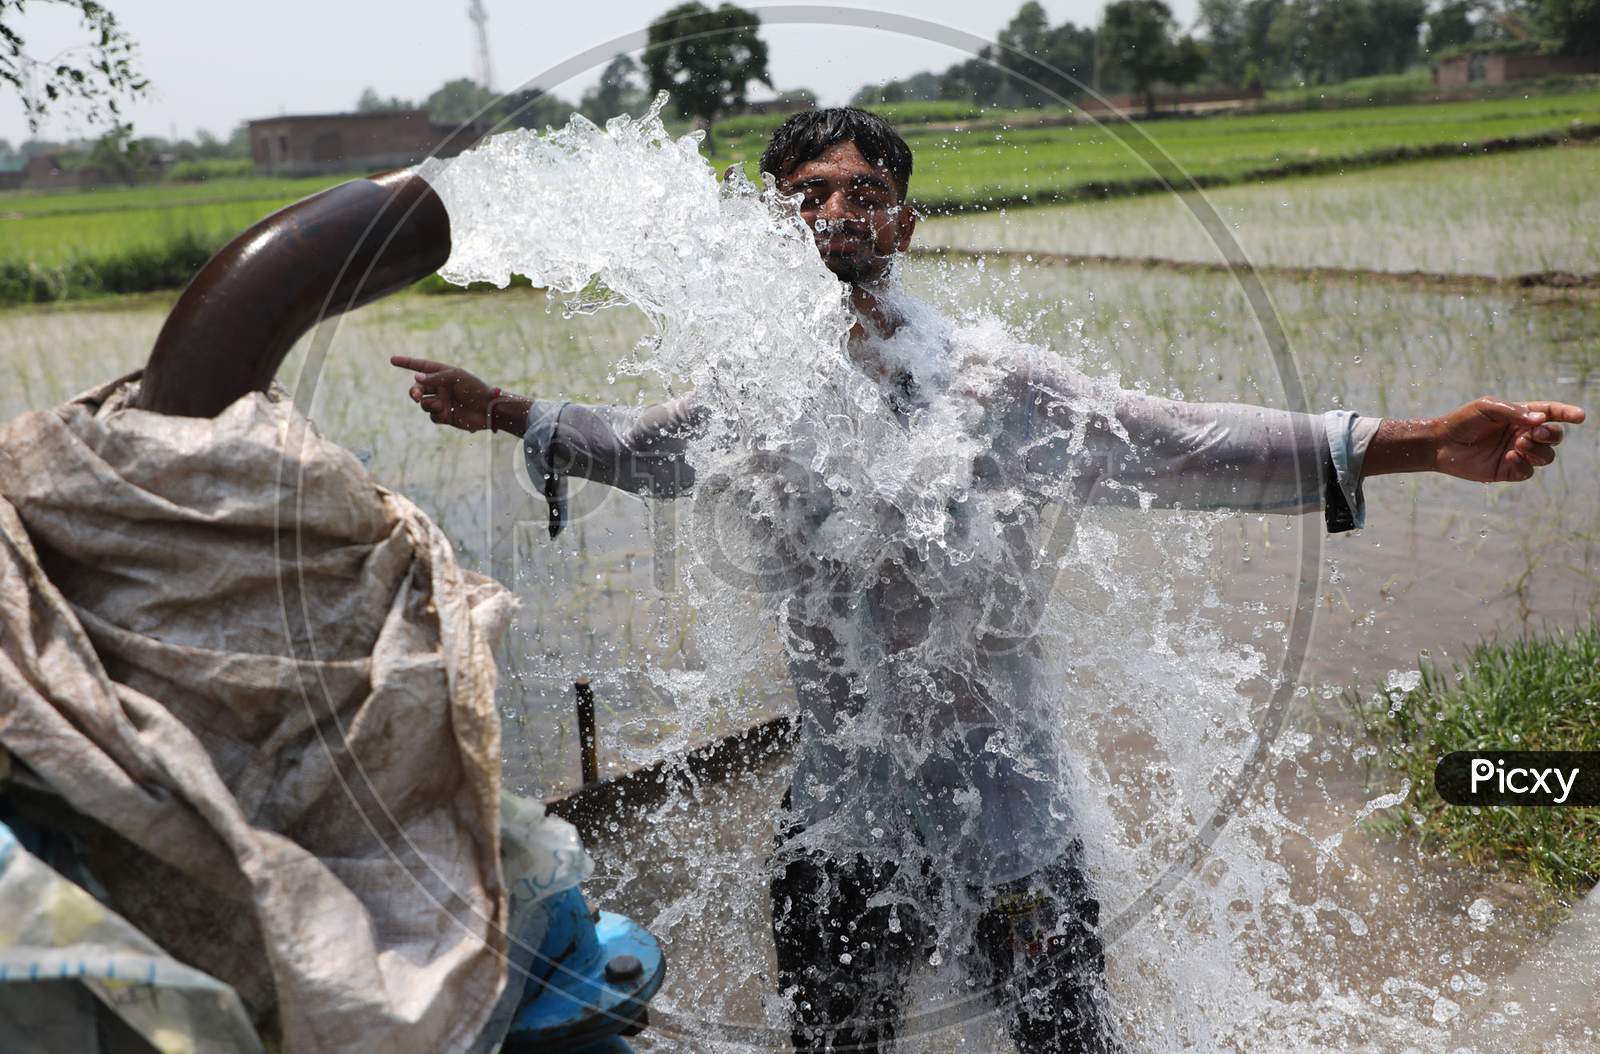 A young man enjoys the cool splash from a tube well on a hot summer day during Unlock 2.0 in Jammu on July 03, 2020.